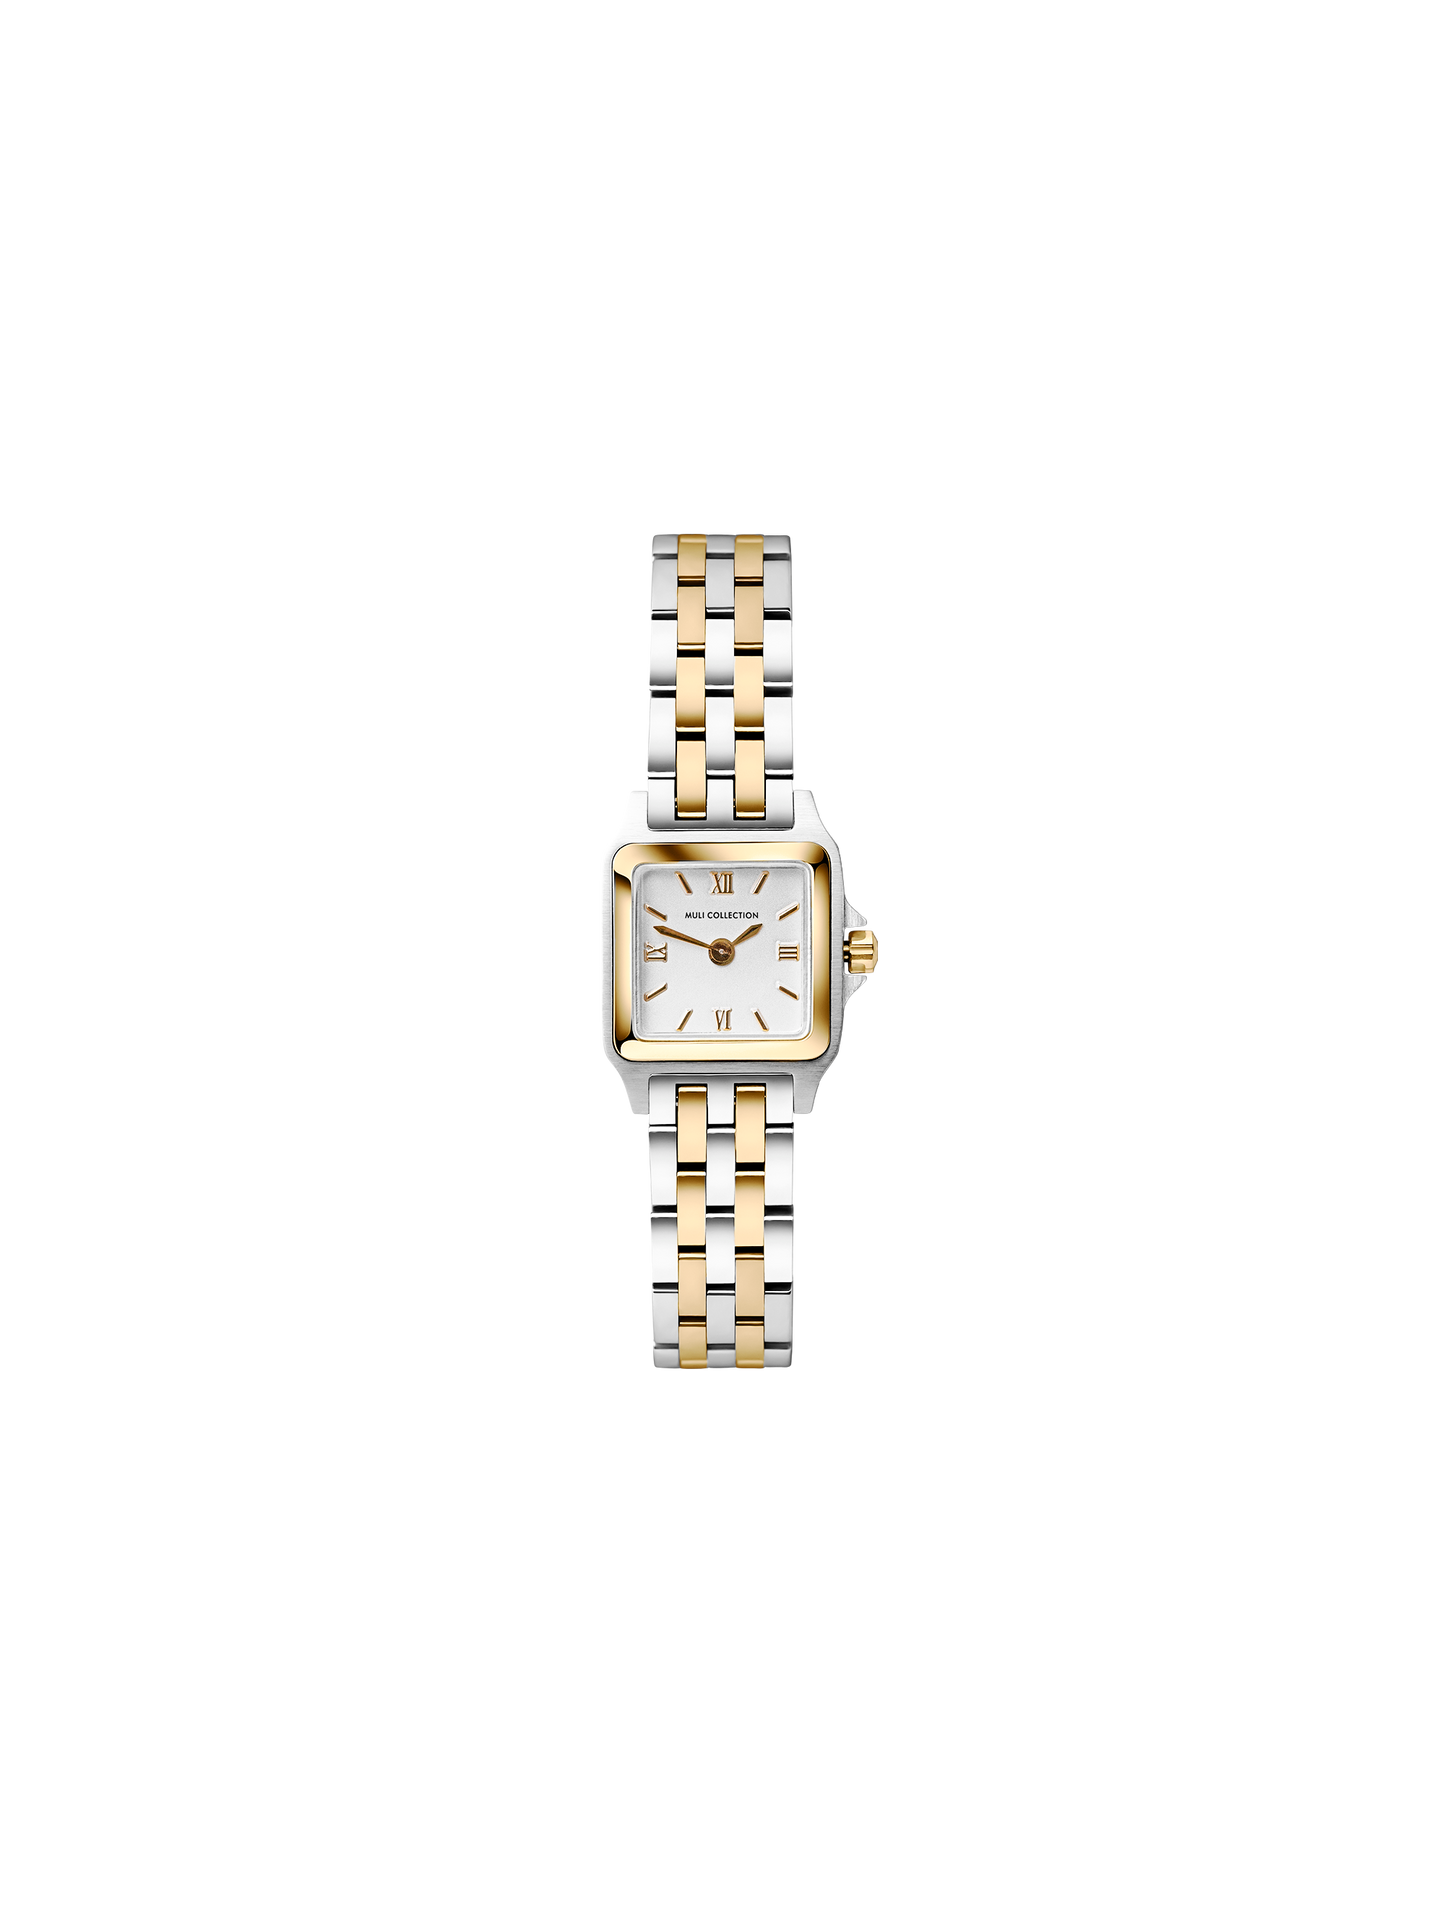 muli collection watch gold/silver